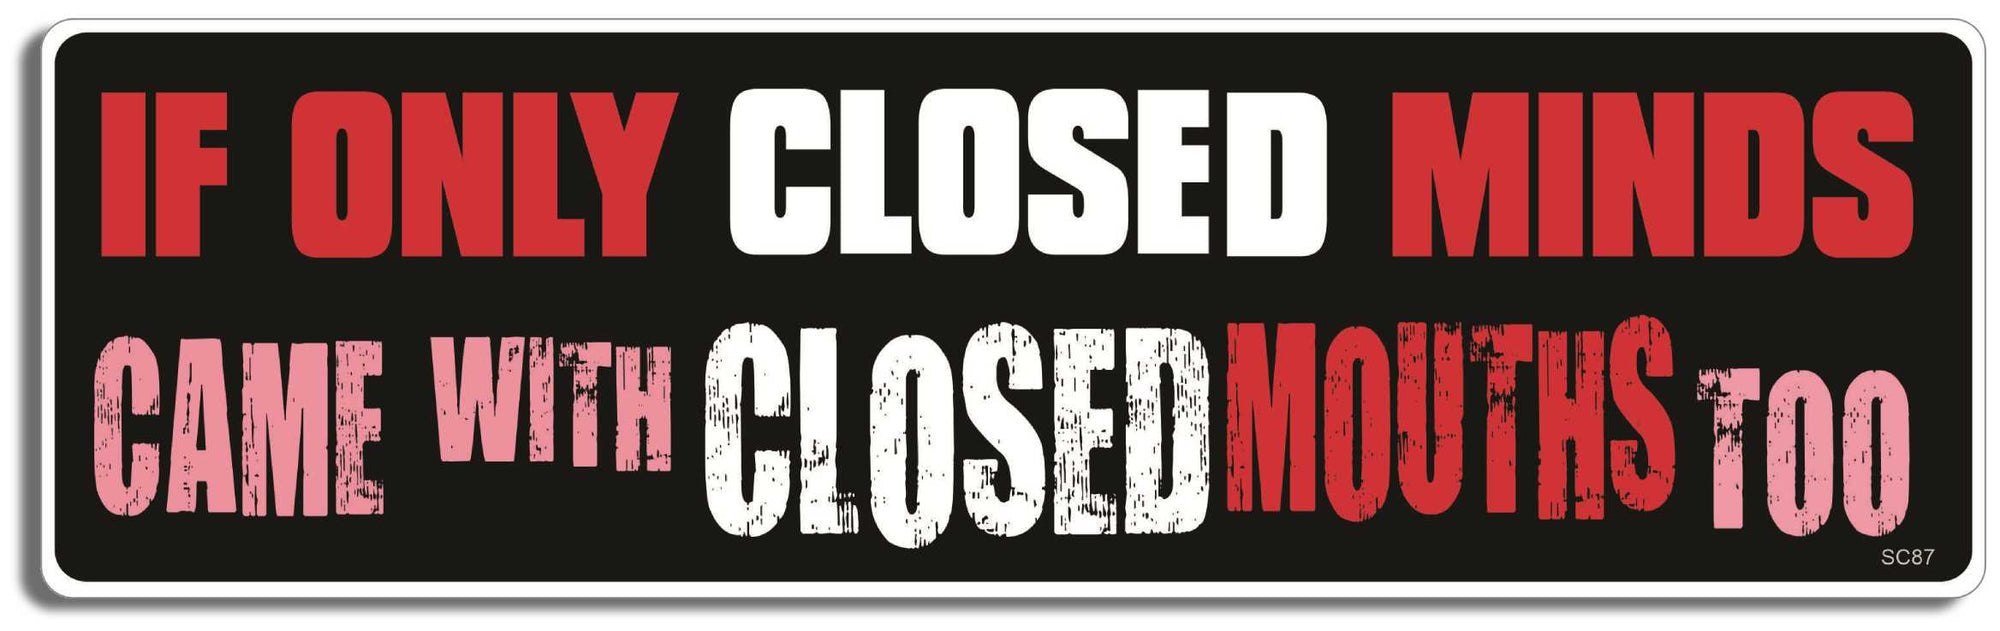 If only closed minds came with closed mouths too - 3" x 10" Bumper Sticker--Car Magnet- -  Decal Bumper Sticker-political Bumper Sticker Car Magnet If only closed minds came with closed-  Decal for carsconservative, liberal, Political